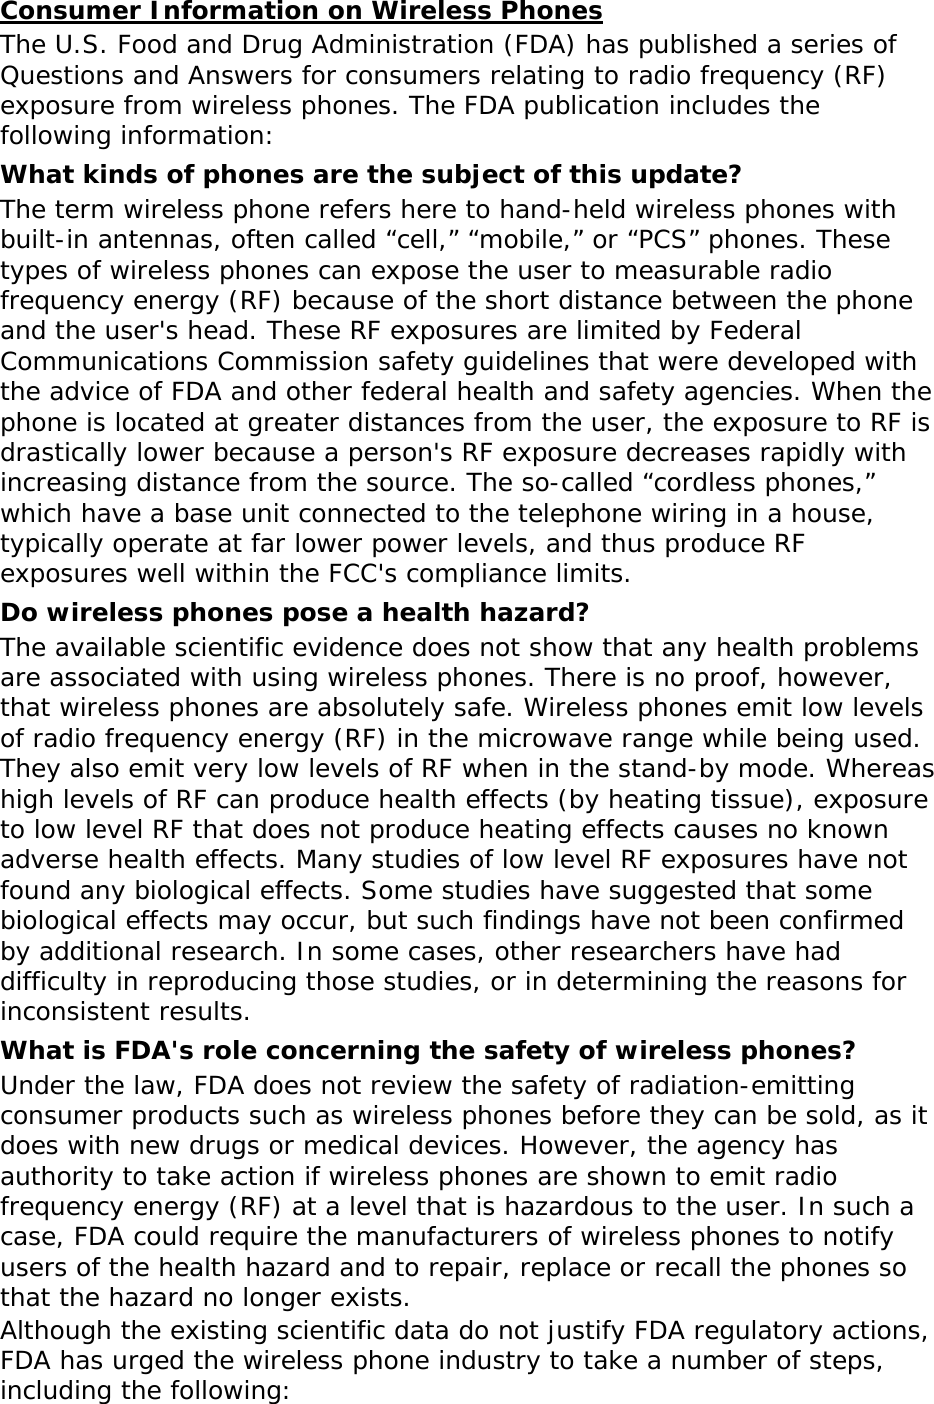 Consumer Information on Wireless Phones The U.S. Food and Drug Administration (FDA) has published a series of Questions and Answers for consumers relating to radio frequency (RF) exposure from wireless phones. The FDA publication includes the following information: What kinds of phones are the subject of this update? The term wireless phone refers here to hand-held wireless phones with built-in antennas, often called “cell,” “mobile,” or “PCS” phones. These types of wireless phones can expose the user to measurable radio frequency energy (RF) because of the short distance between the phone and the user&apos;s head. These RF exposures are limited by Federal Communications Commission safety guidelines that were developed with the advice of FDA and other federal health and safety agencies. When the phone is located at greater distances from the user, the exposure to RF is drastically lower because a person&apos;s RF exposure decreases rapidly with increasing distance from the source. The so-called “cordless phones,” which have a base unit connected to the telephone wiring in a house, typically operate at far lower power levels, and thus produce RF exposures well within the FCC&apos;s compliance limits. Do wireless phones pose a health hazard? The available scientific evidence does not show that any health problems are associated with using wireless phones. There is no proof, however, that wireless phones are absolutely safe. Wireless phones emit low levels of radio frequency energy (RF) in the microwave range while being used. They also emit very low levels of RF when in the stand-by mode. Whereas high levels of RF can produce health effects (by heating tissue), exposure to low level RF that does not produce heating effects causes no known adverse health effects. Many studies of low level RF exposures have not found any biological effects. Some studies have suggested that some biological effects may occur, but such findings have not been confirmed by additional research. In some cases, other researchers have had difficulty in reproducing those studies, or in determining the reasons for inconsistent results. What is FDA&apos;s role concerning the safety of wireless phones? Under the law, FDA does not review the safety of radiation-emitting consumer products such as wireless phones before they can be sold, as it does with new drugs or medical devices. However, the agency has authority to take action if wireless phones are shown to emit radio frequency energy (RF) at a level that is hazardous to the user. In such a case, FDA could require the manufacturers of wireless phones to notify users of the health hazard and to repair, replace or recall the phones so that the hazard no longer exists. Although the existing scientific data do not justify FDA regulatory actions, FDA has urged the wireless phone industry to take a number of steps, including the following: 